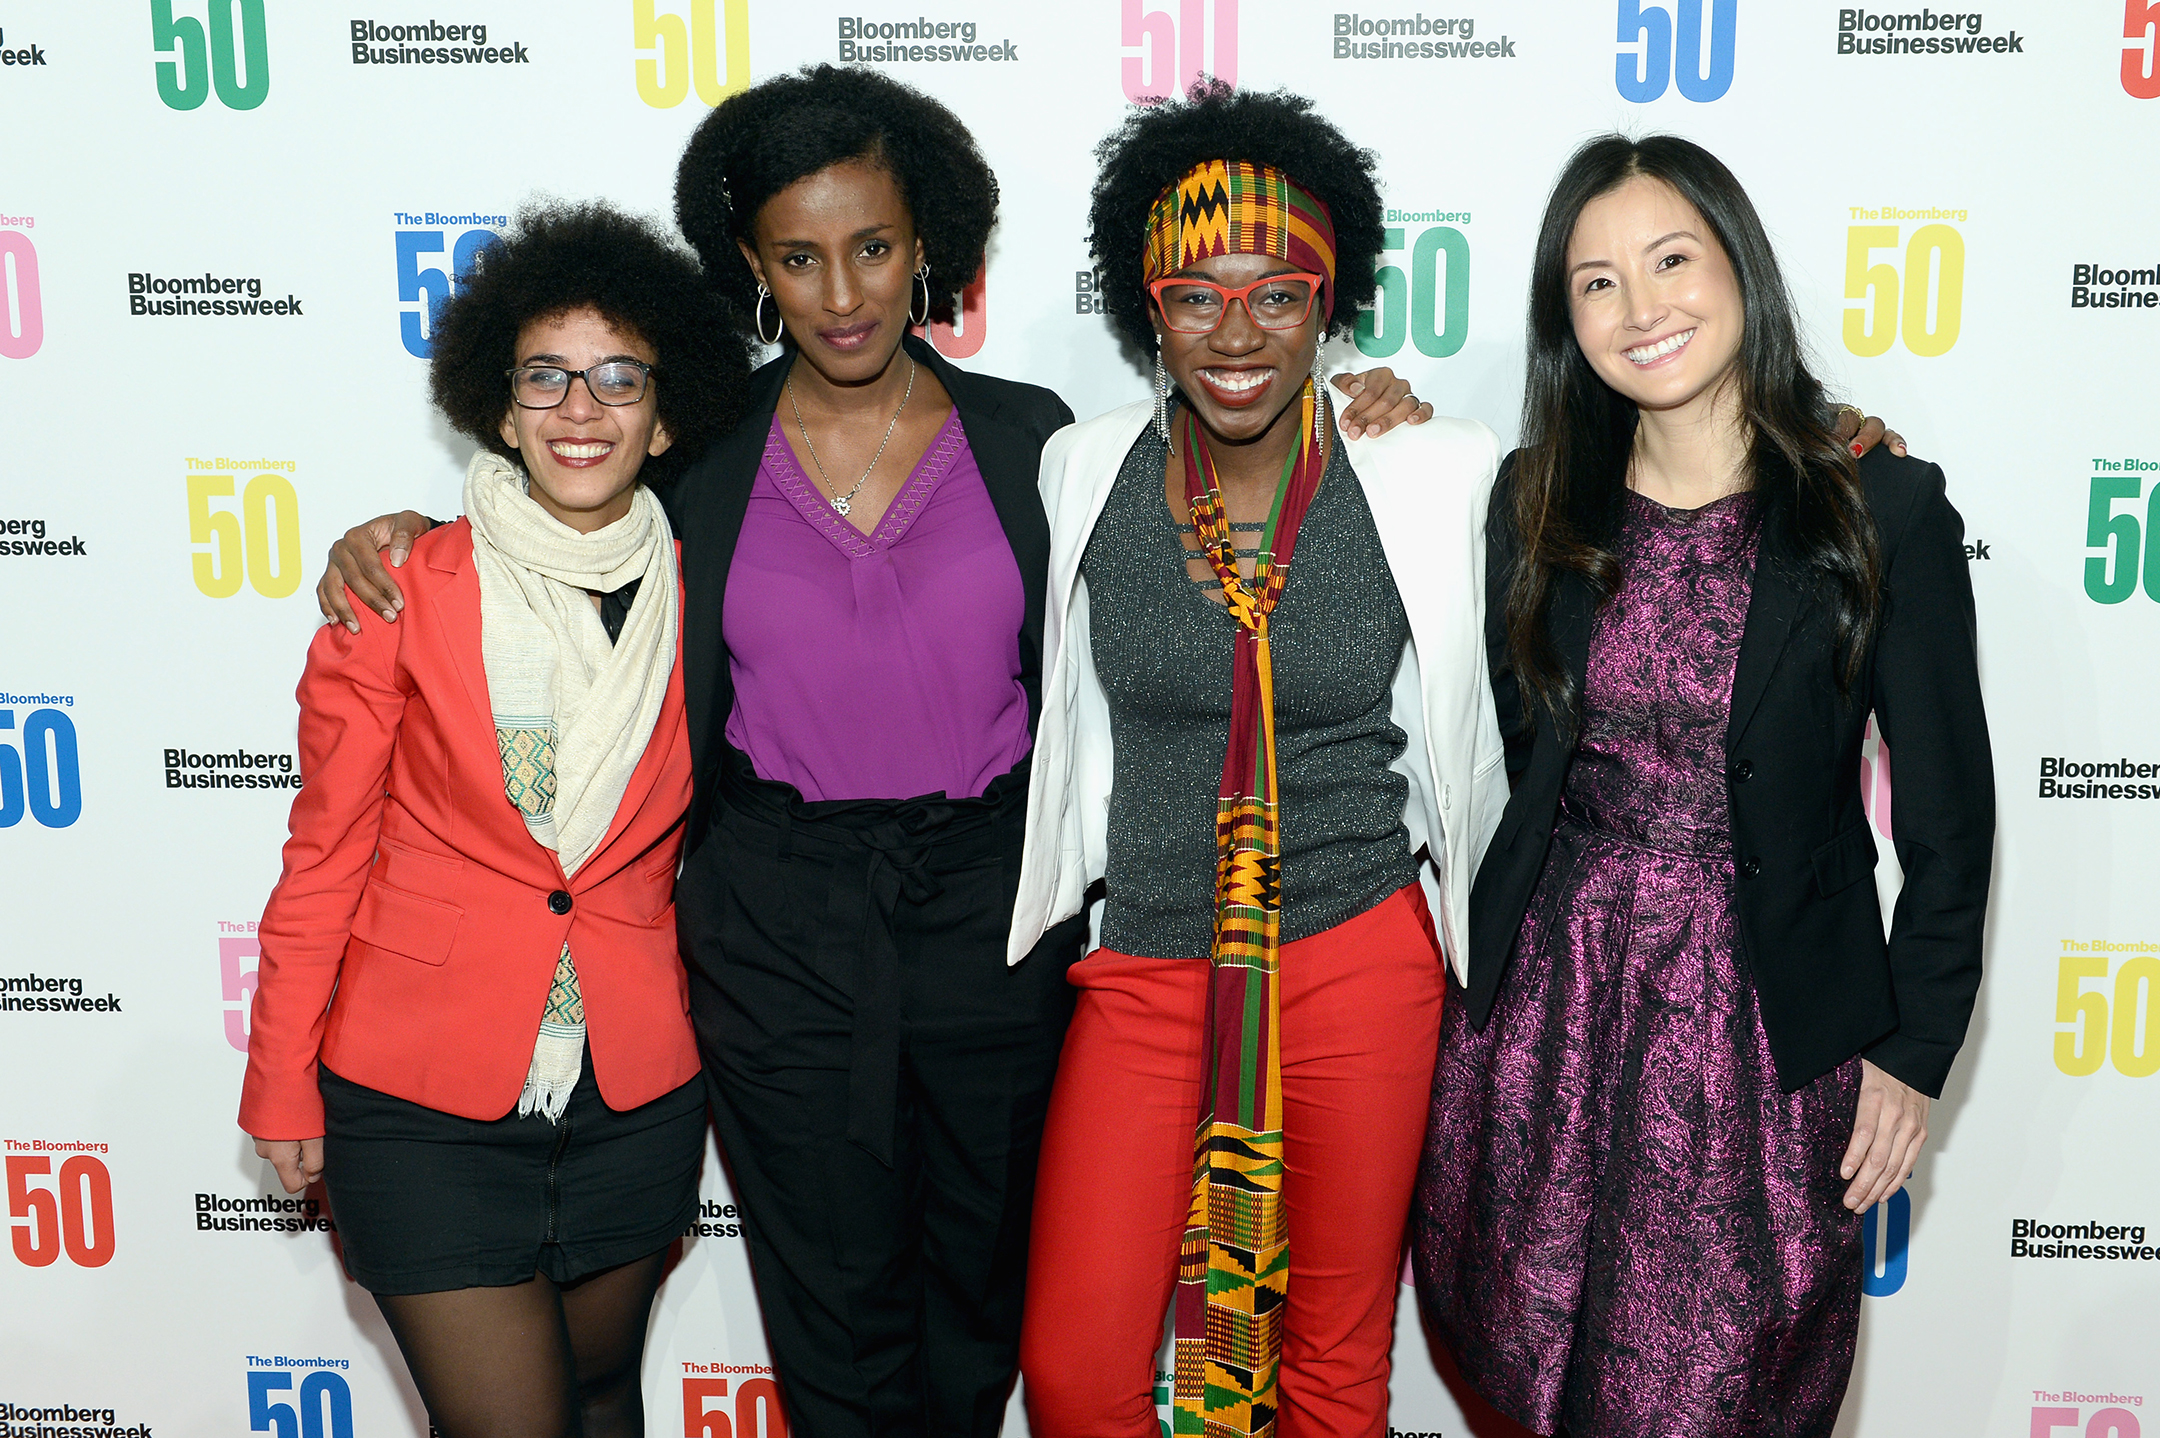 Photo of four women of color standing together and smiling at an event